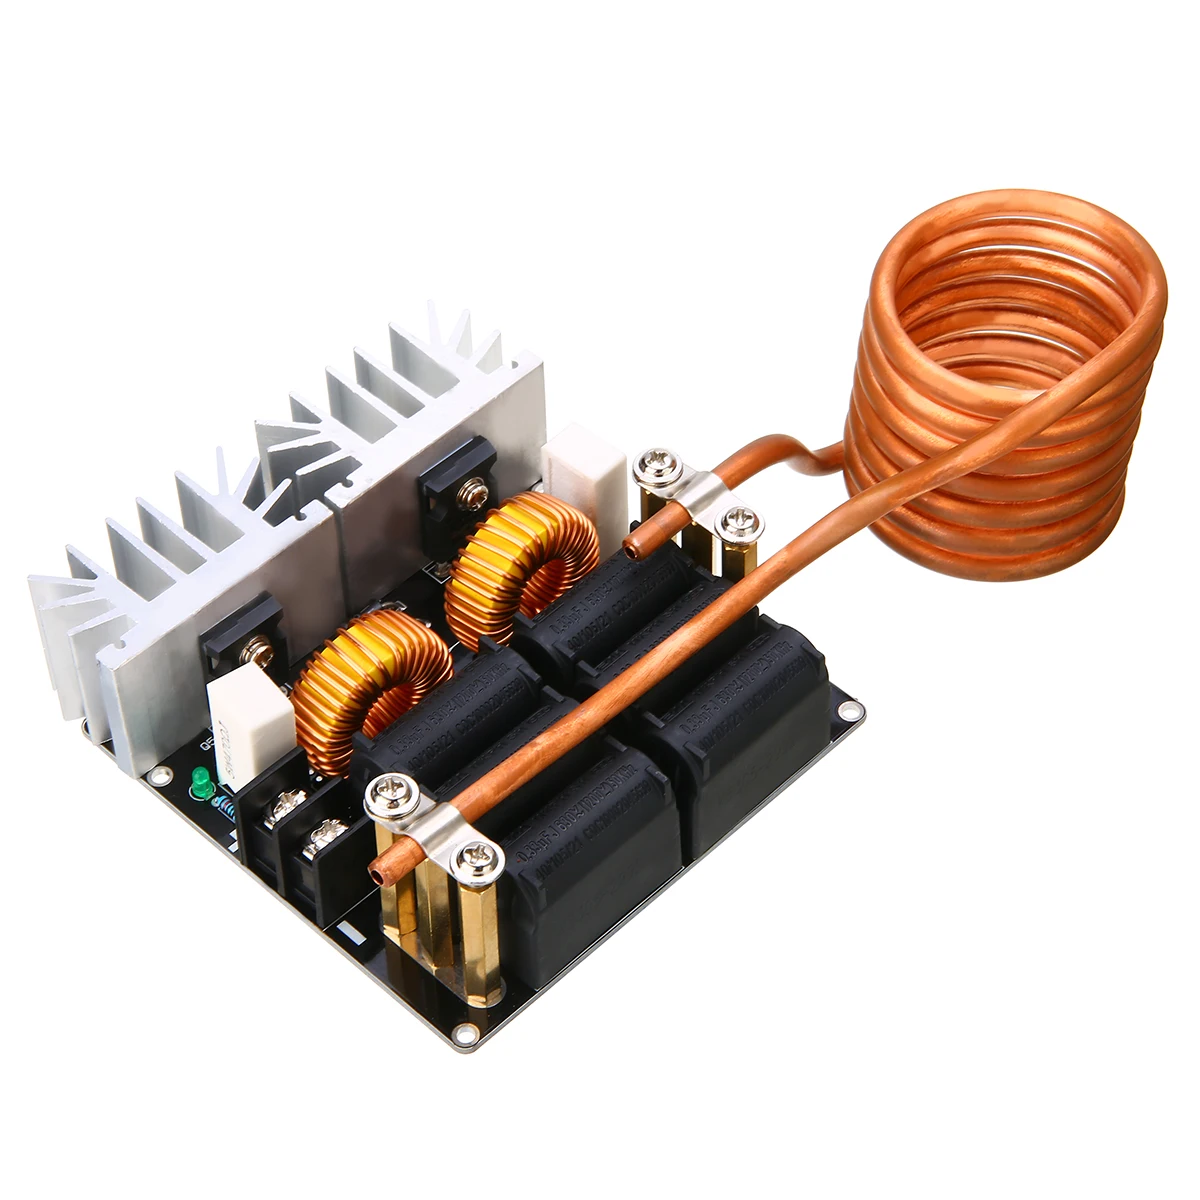 1pc Low Voltage Induction Heating Module DIY Heater Board 1000W ZVS with Tesla Coil